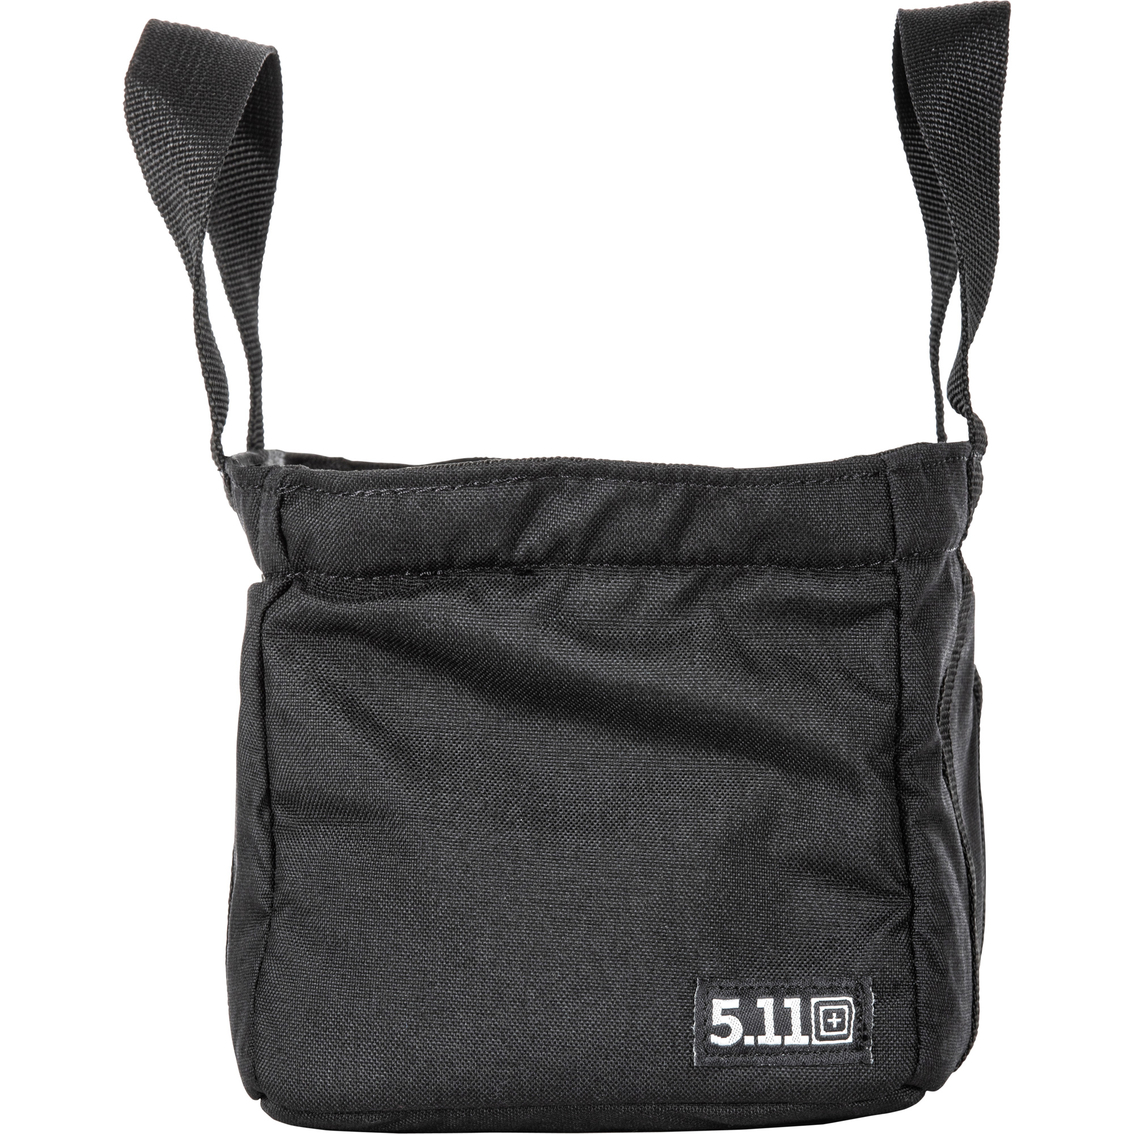 5.11 Range Master Padded Pouch | Bags, Packs & Pouches | Military ...